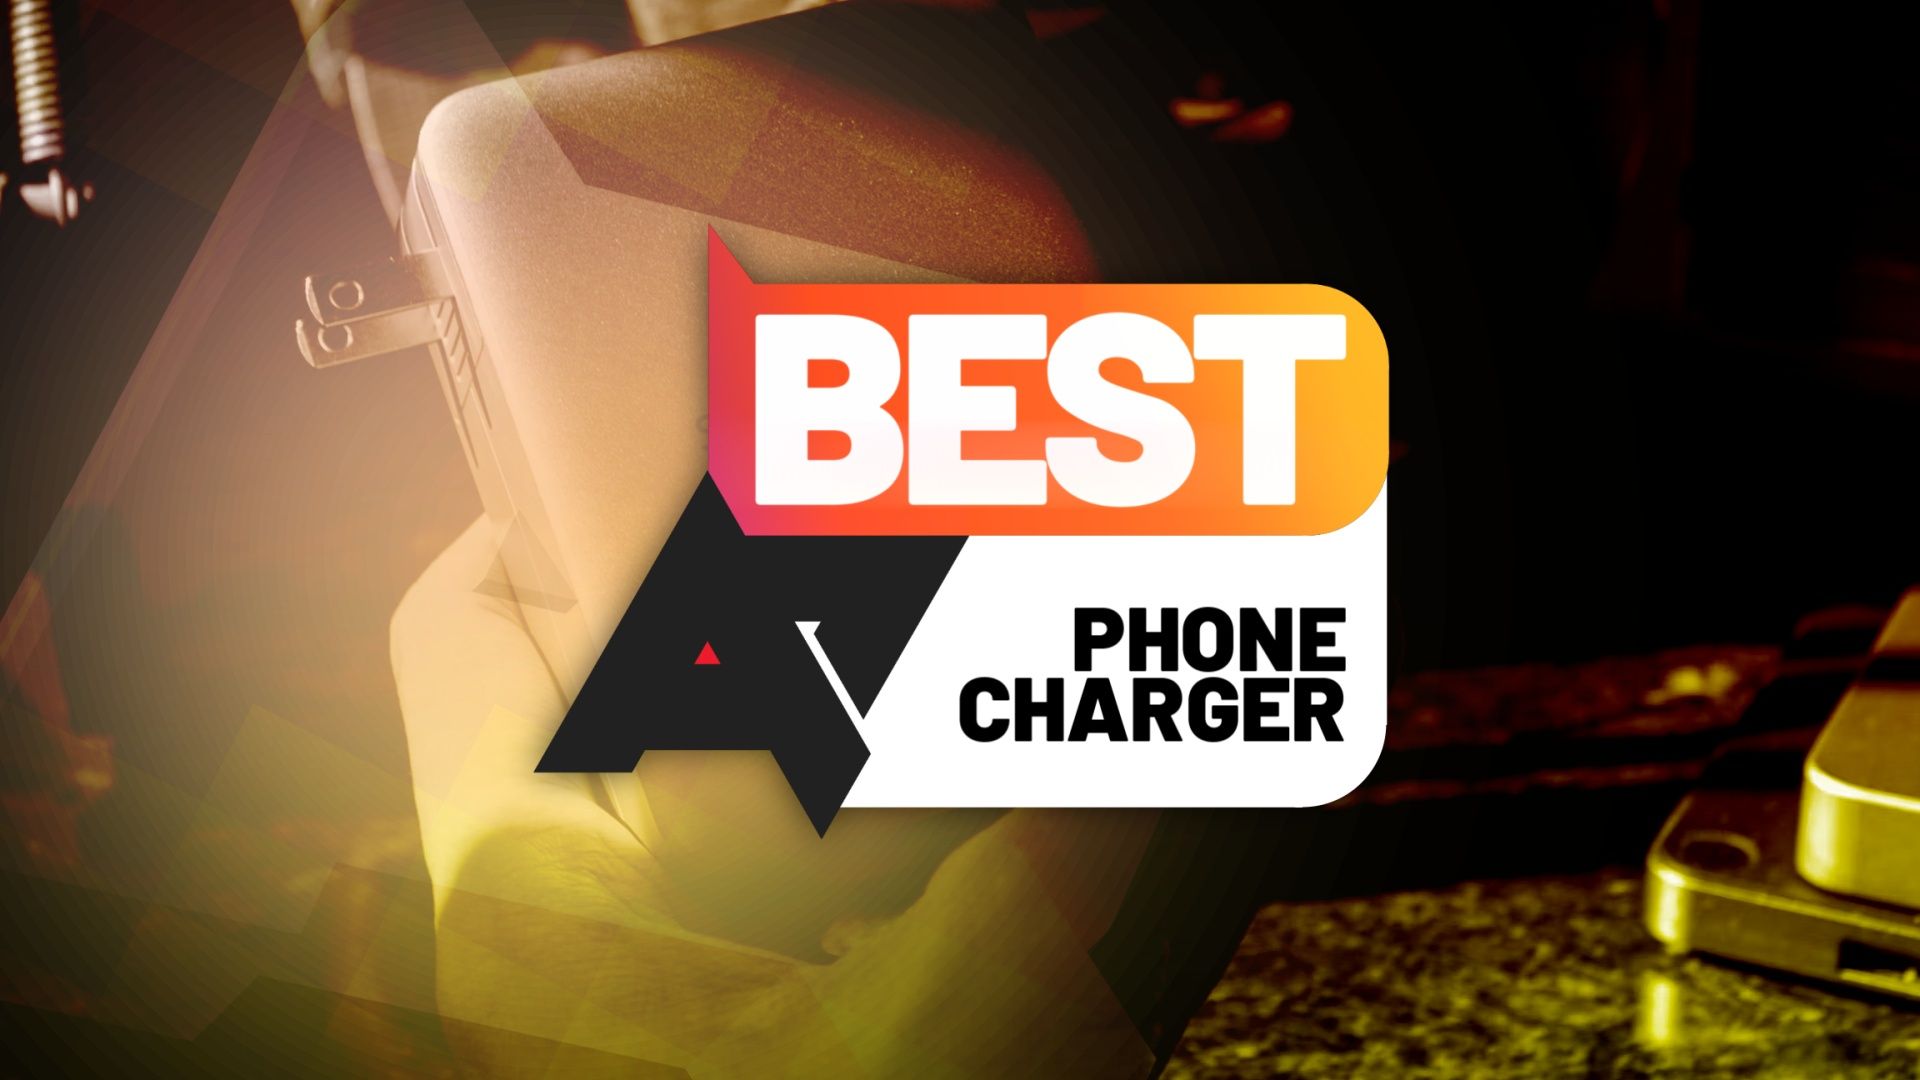 A dark-tinted photograph of phone chargers with an AP Best phone charger logo in front